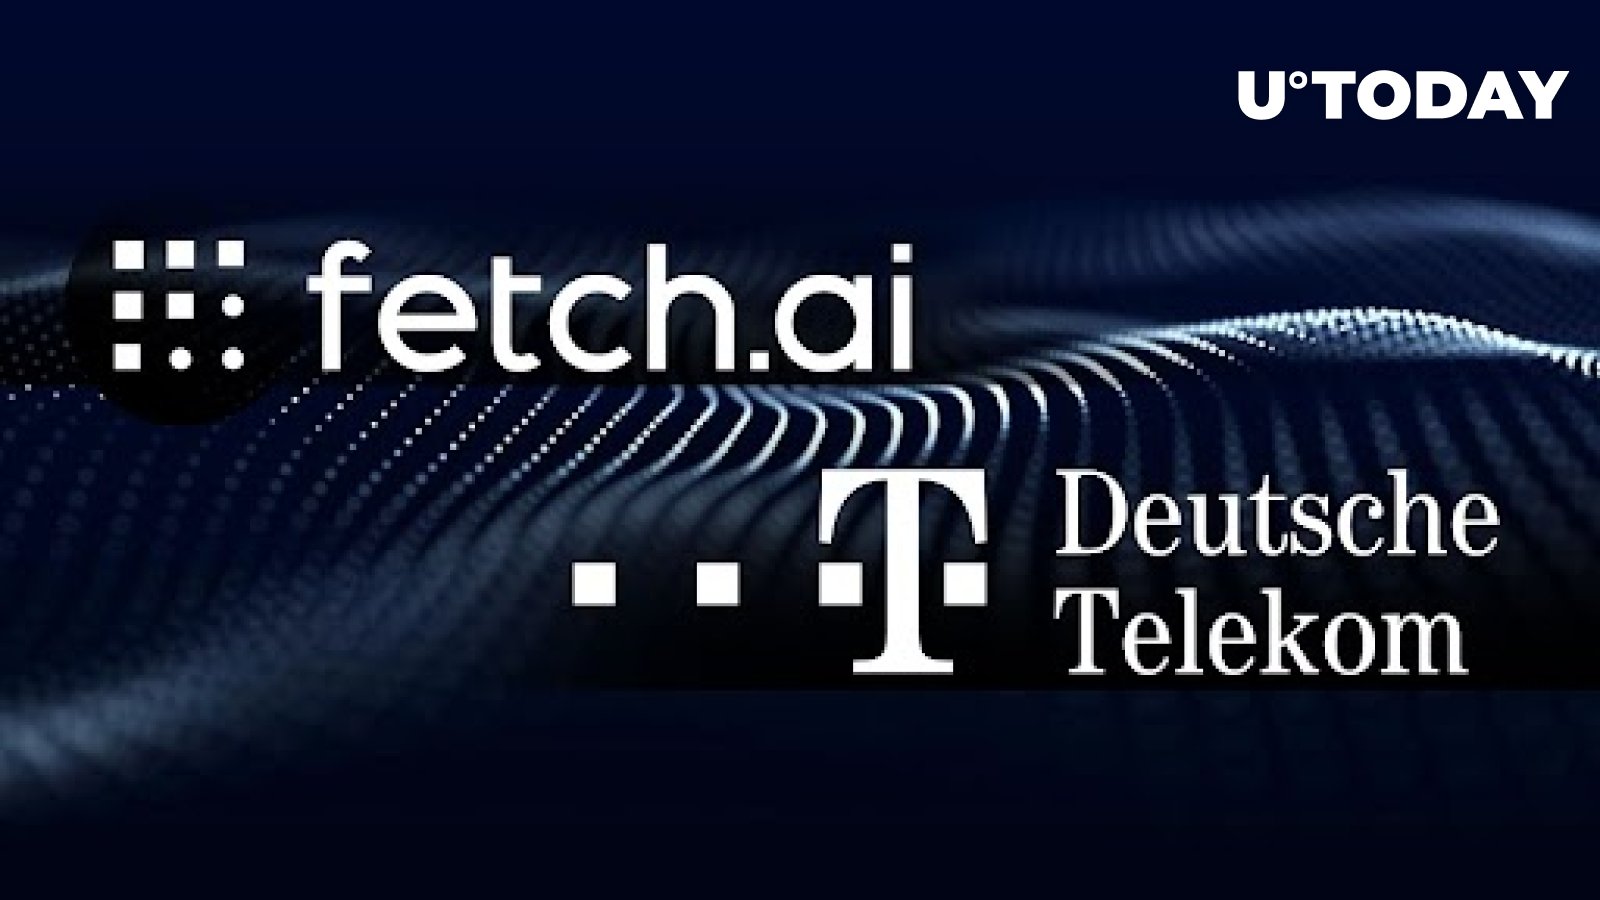 Fetch.ai and Deutsche Telekom Partner to Drive Epic Industrial Adoption